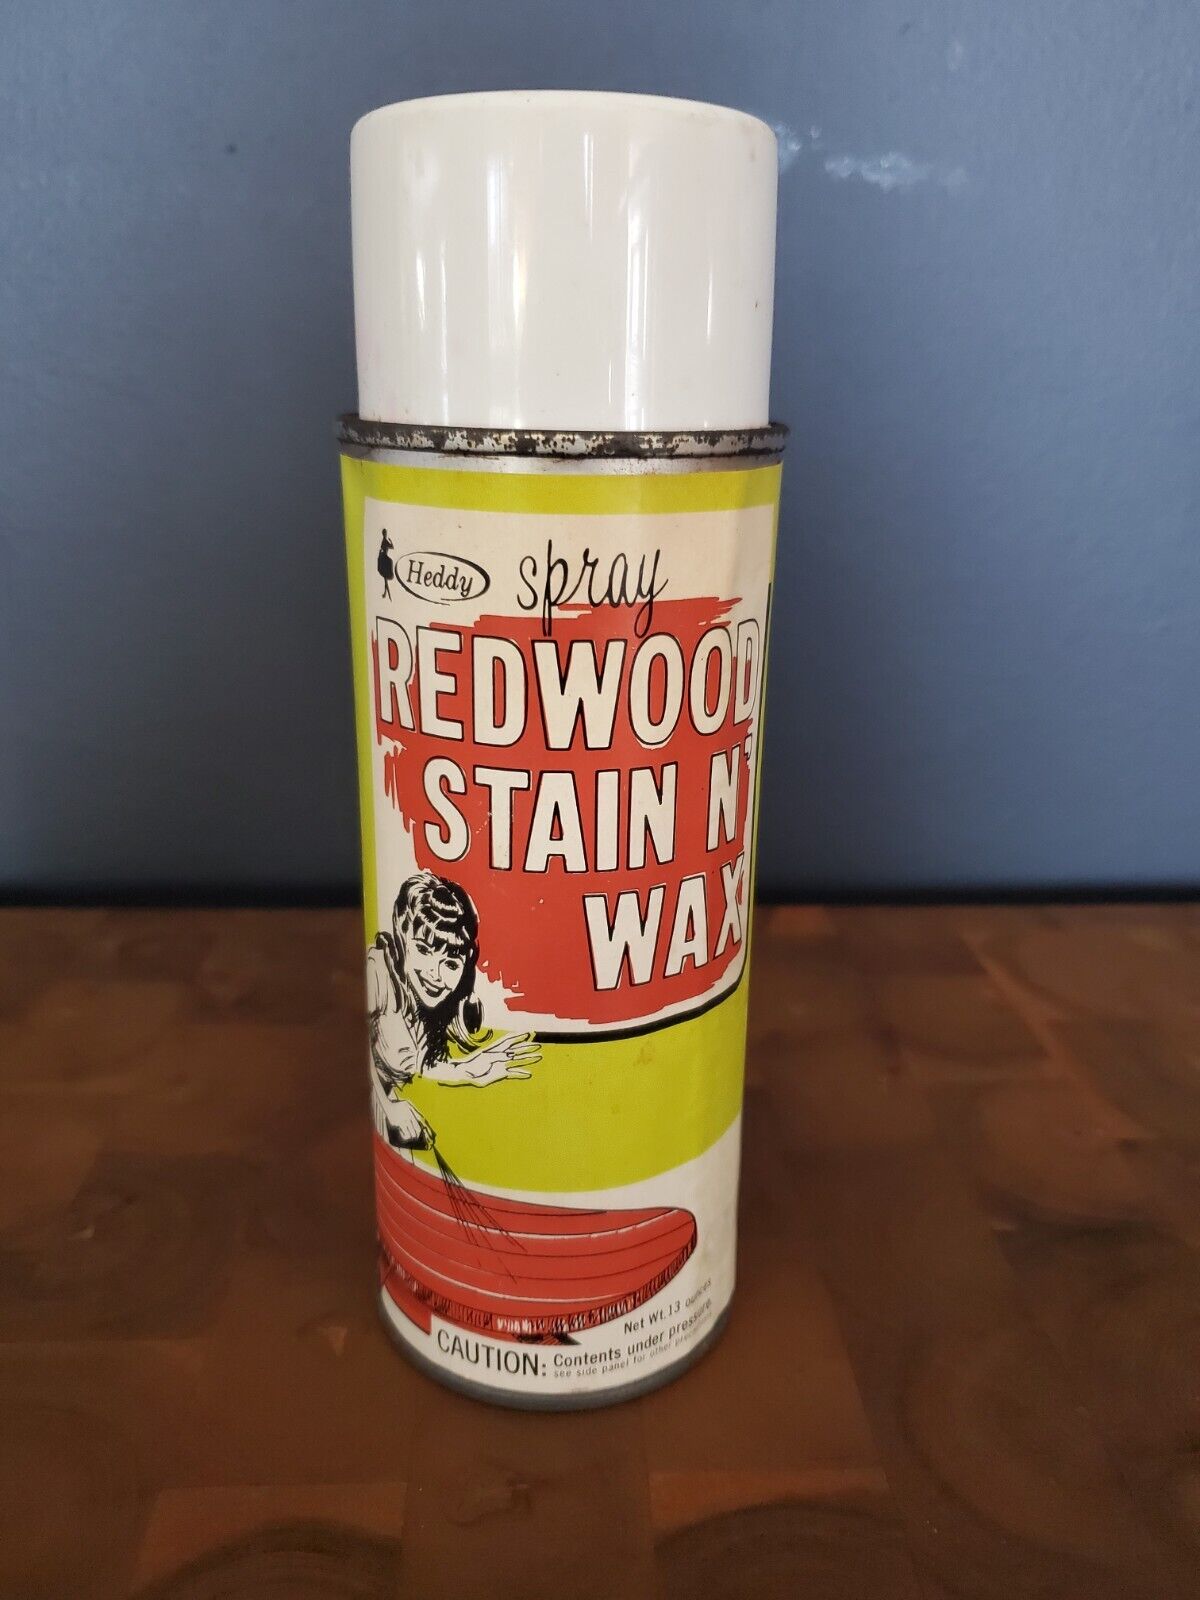 RARE Vintage Heddy Redwood Stain & Wax Spray Near Full Advertising Paper Label 